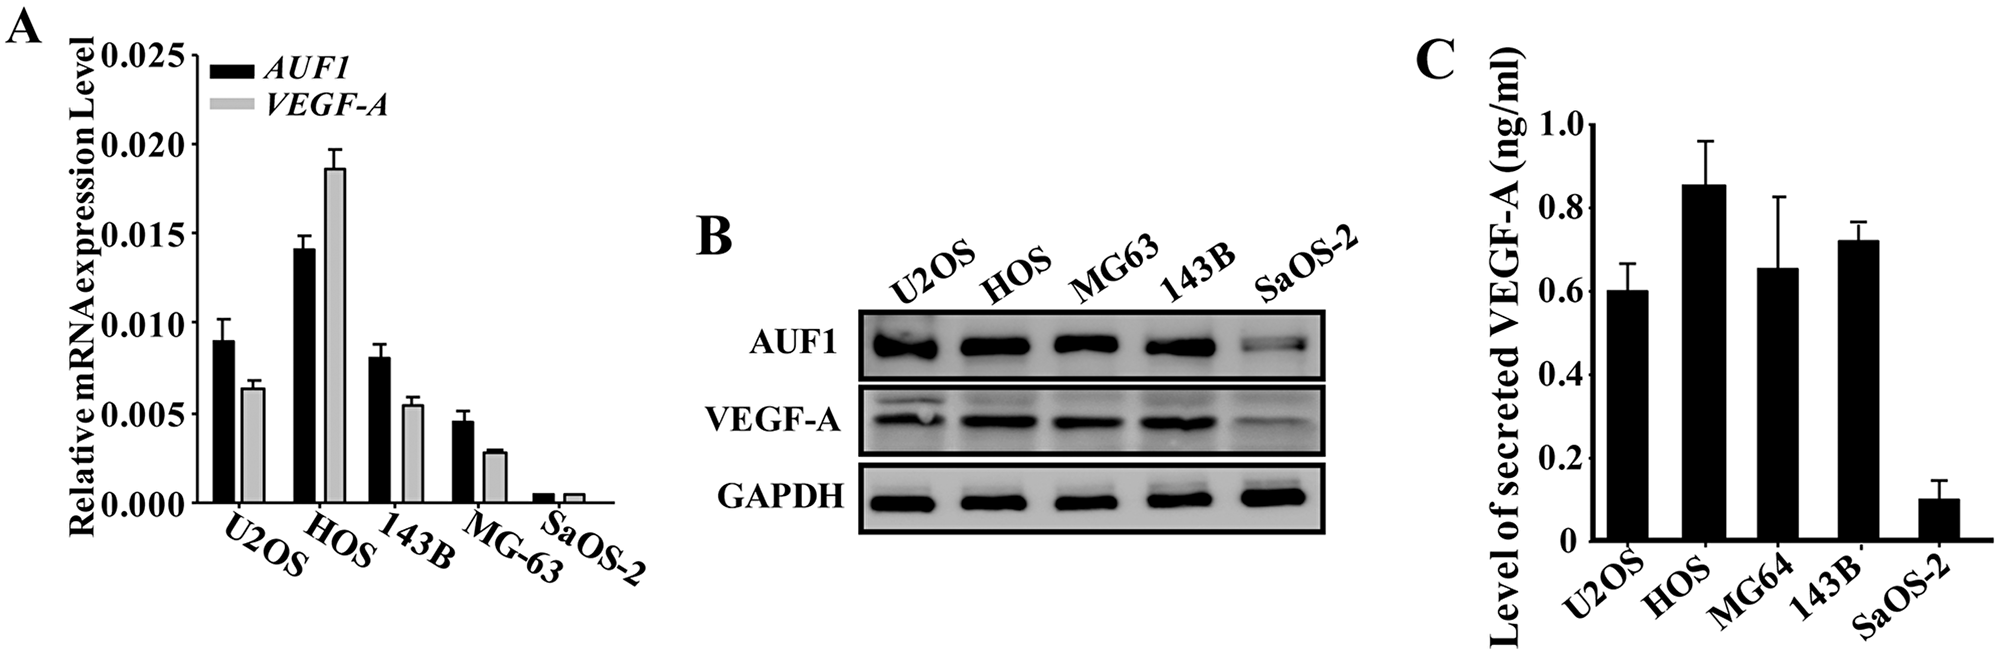 AUF1 positively regulates the expression of VEGF-A in osteosarcoma cells.